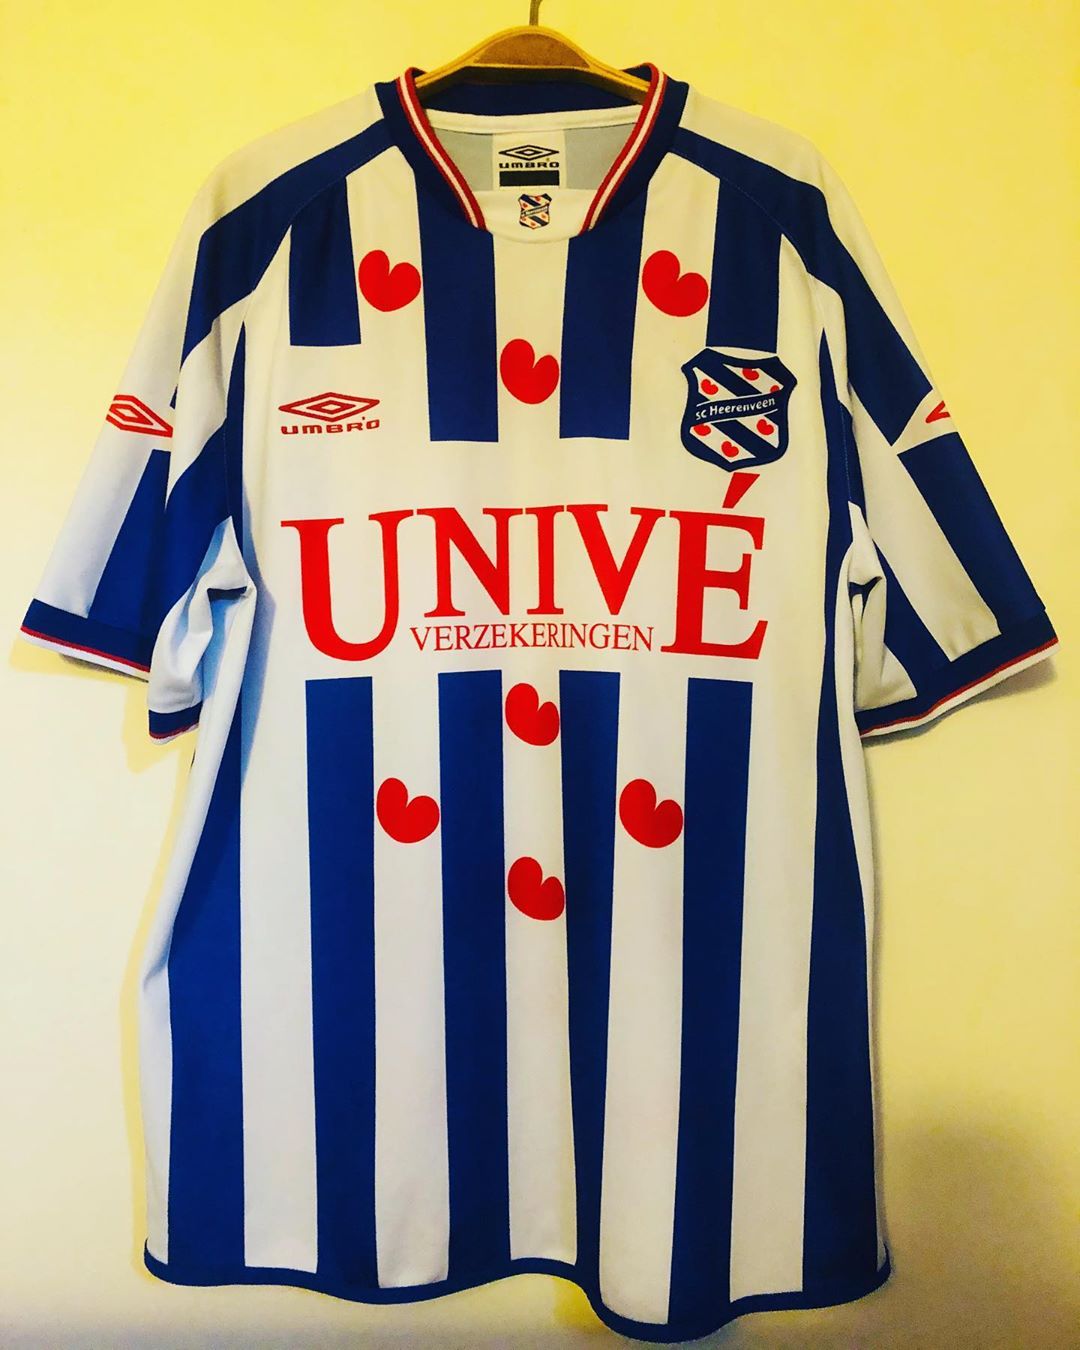 SC Heerenveen Home 2003/2004 Football Shirt Manufactured By Umbro. The club plays football in The Netherlands.